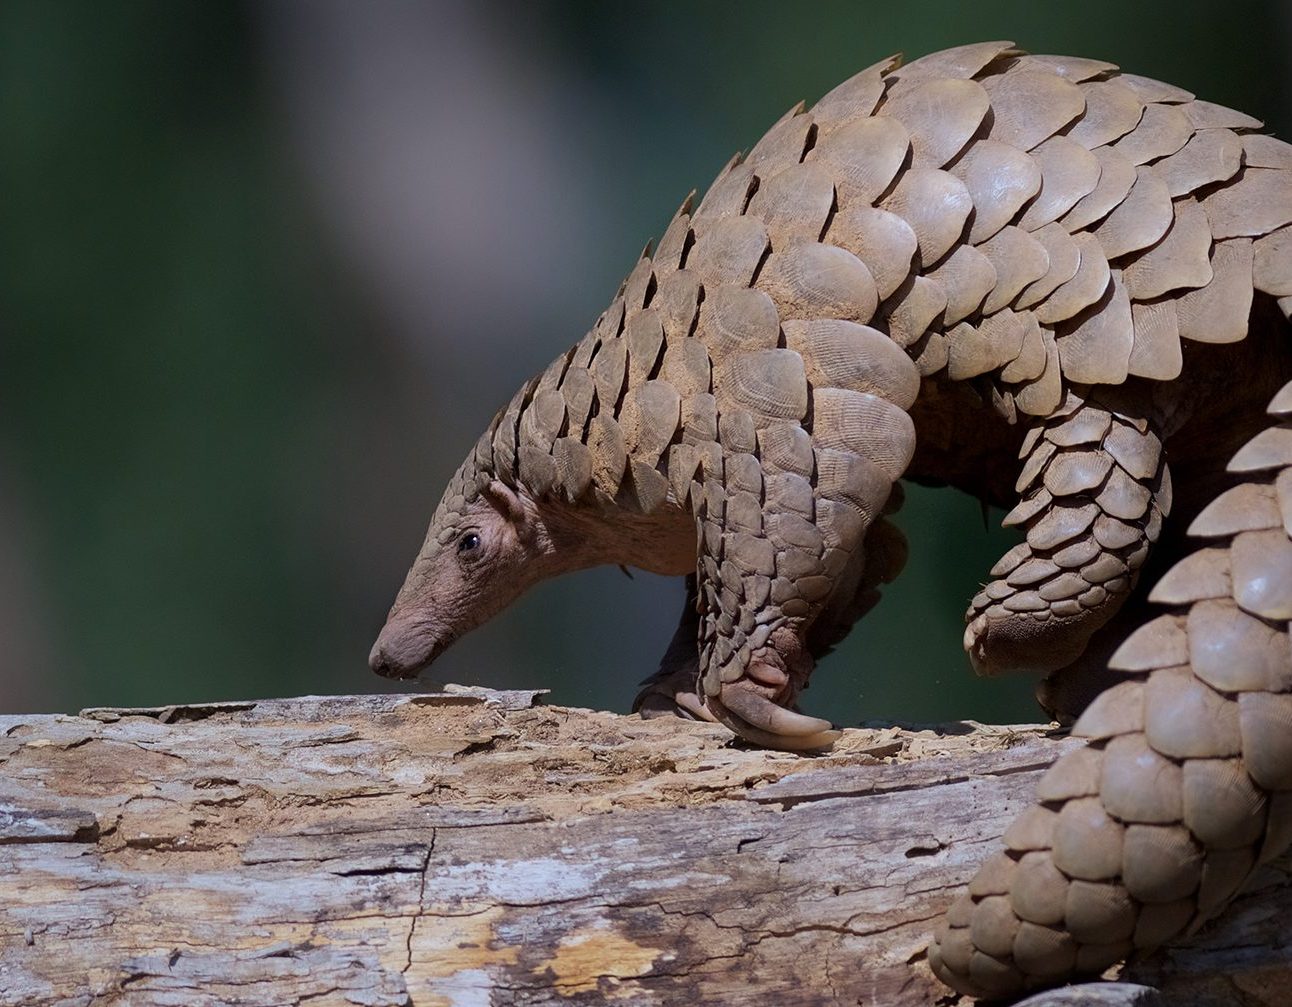 A photo of a pangolin on a tree branch